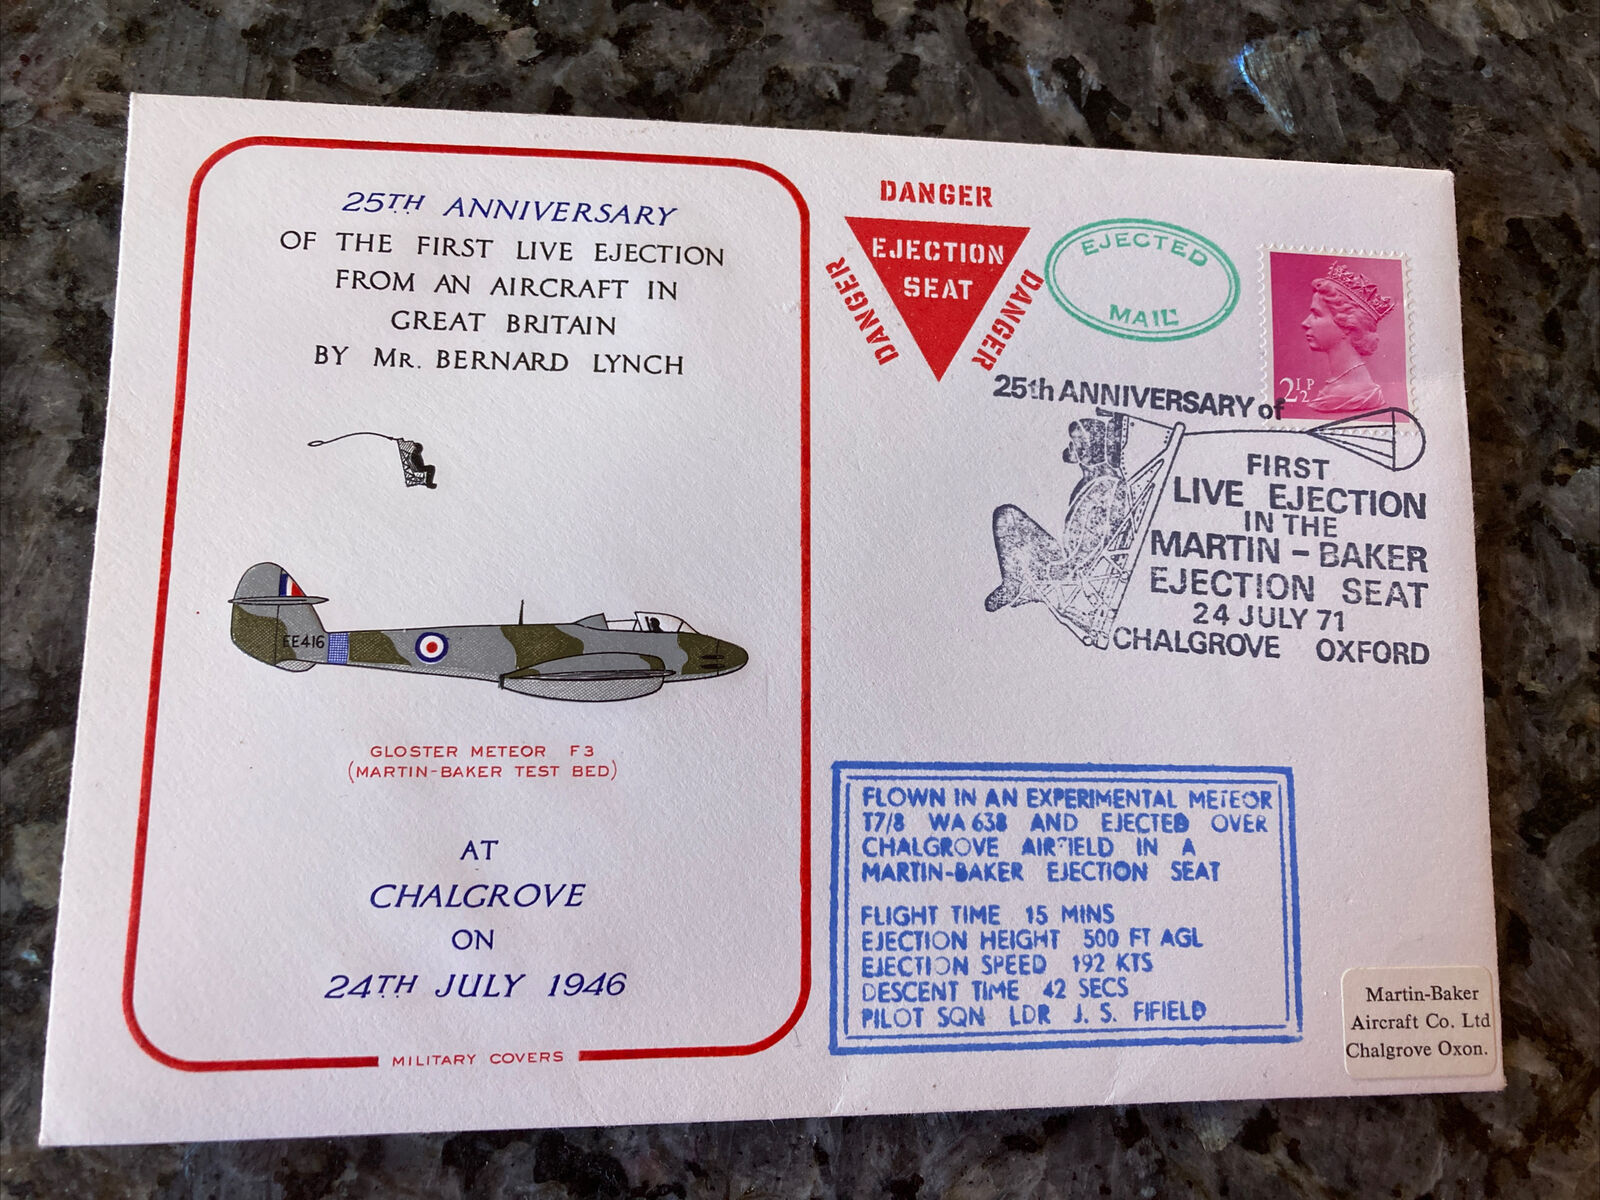 Martin Baker Ejection Seat 25th Anniversary Ejected Mail Chalgrove 1971